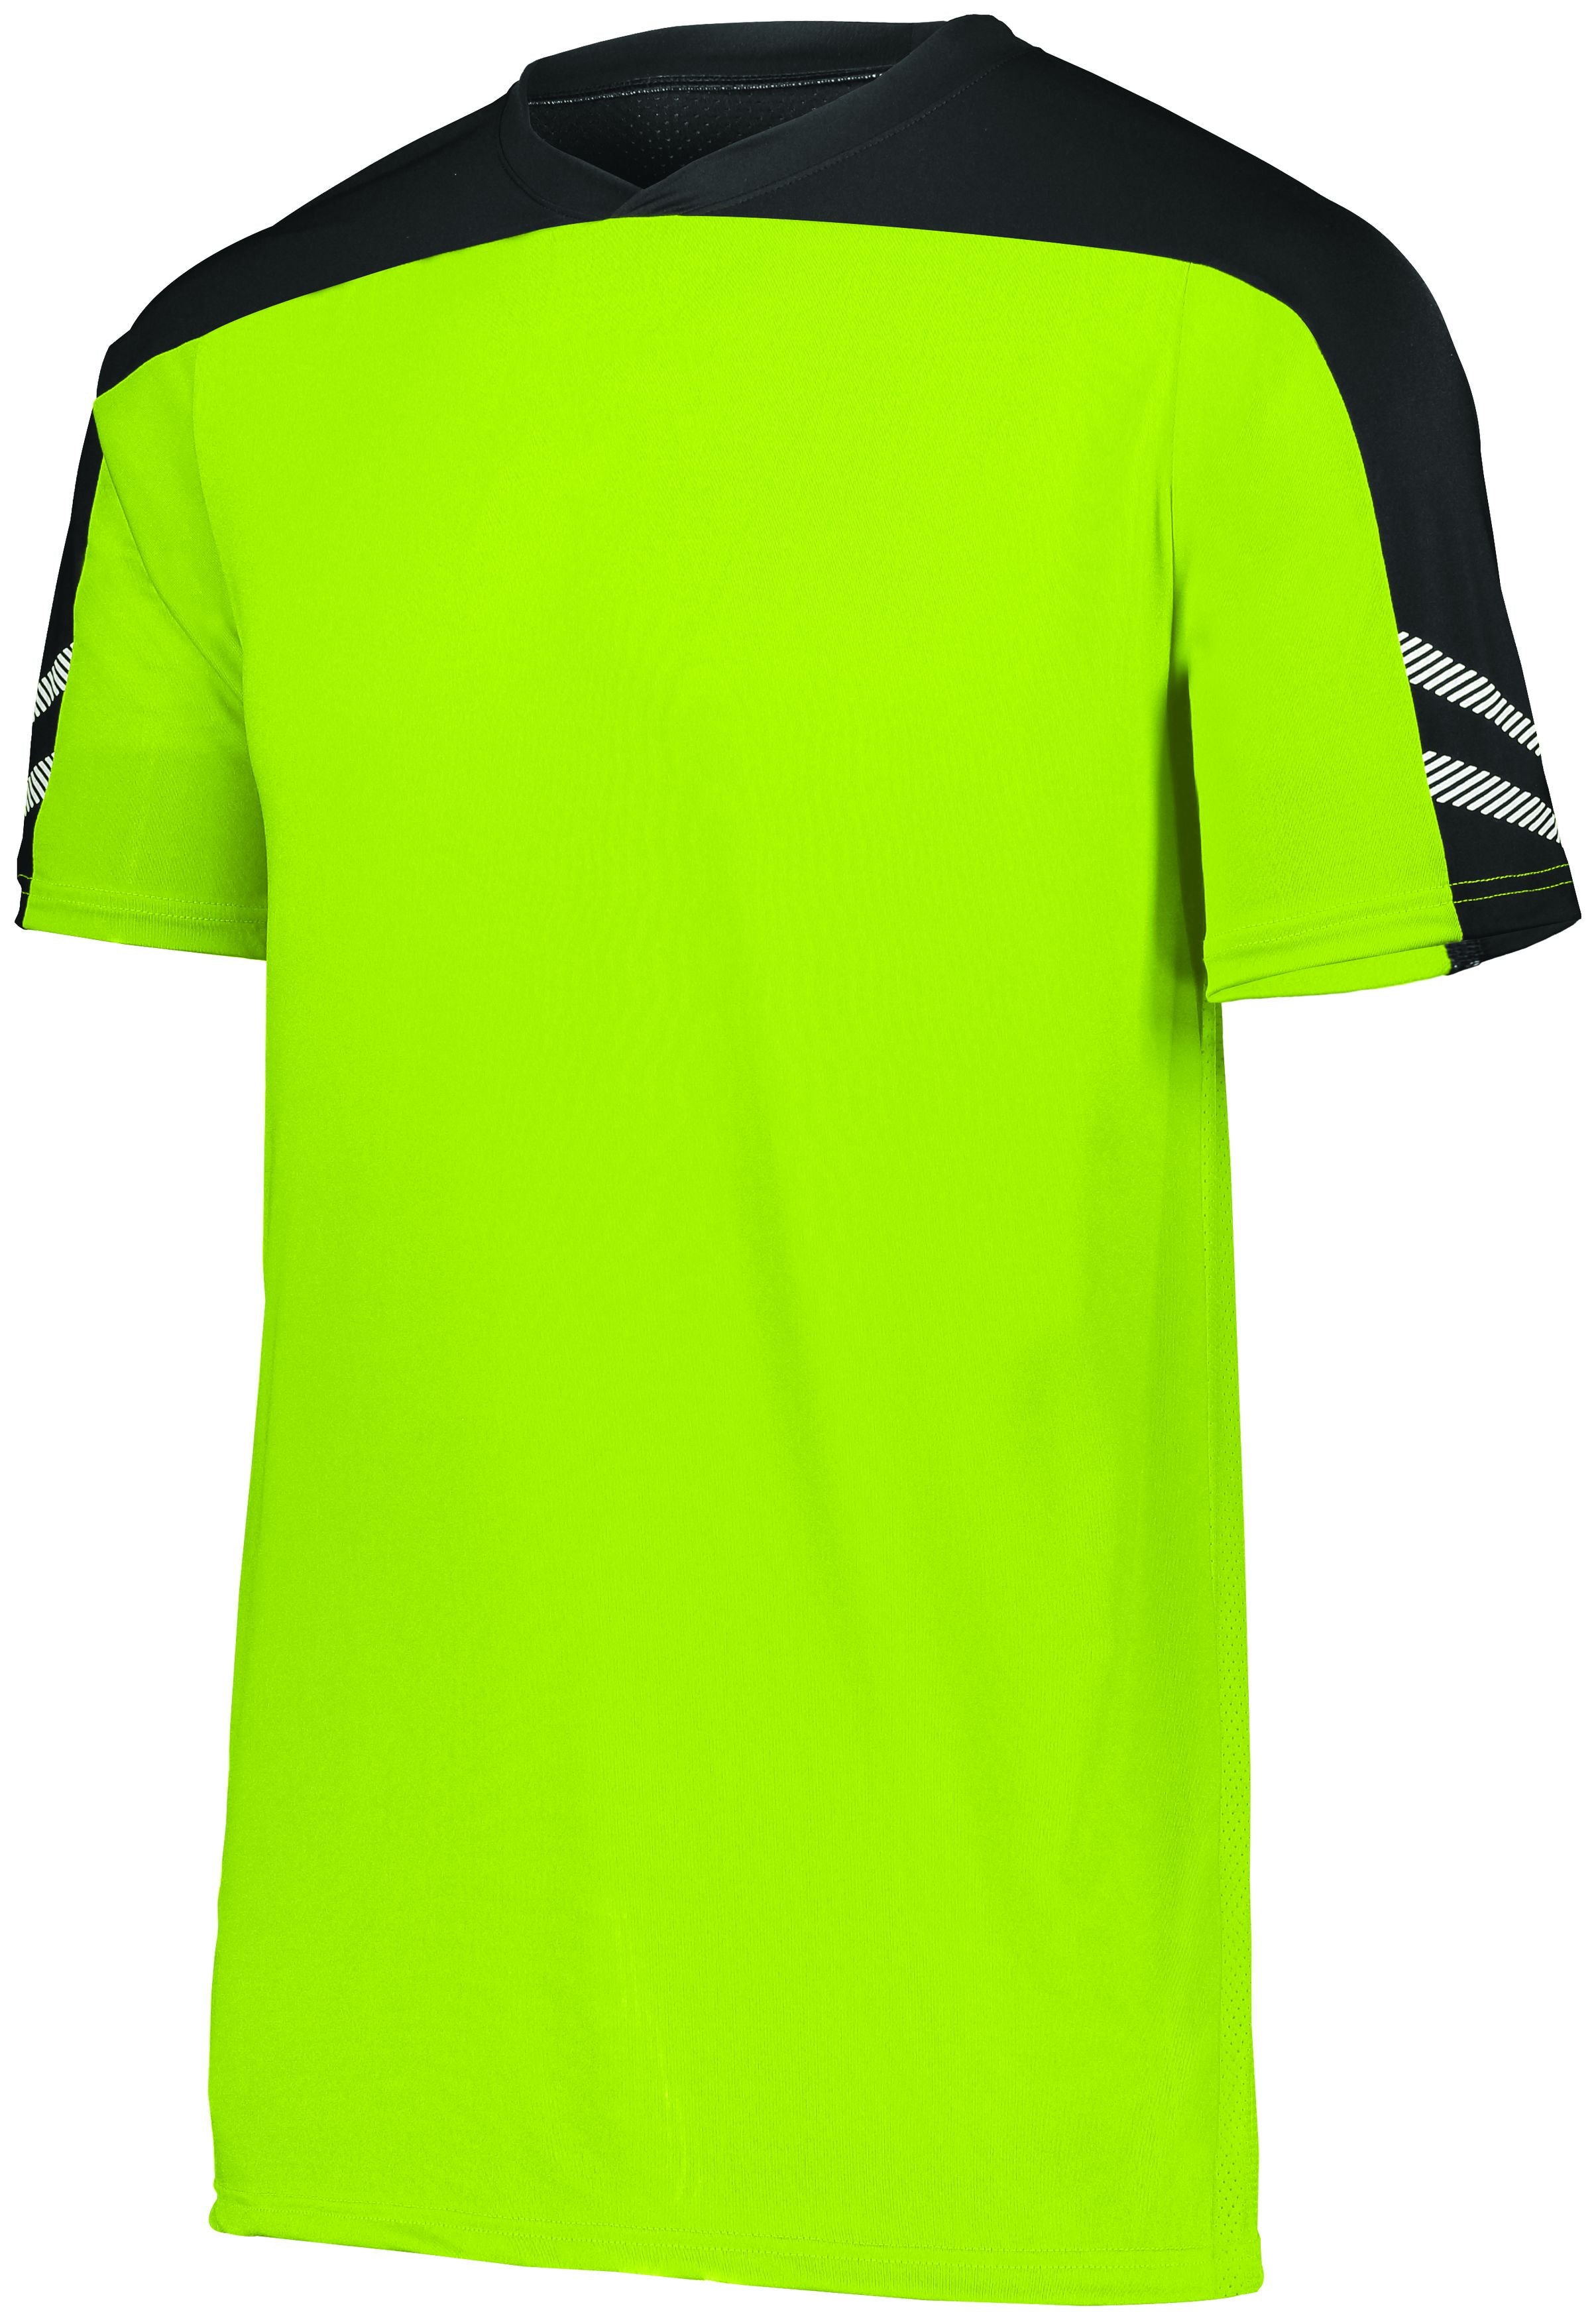 High 5 Anfield Soccer Jersey in Lime/Black/White  -Part of the Adult, Adult-Jersey, High5-Products, Soccer, Shirts, All-Sports-1 product lines at KanaleyCreations.com